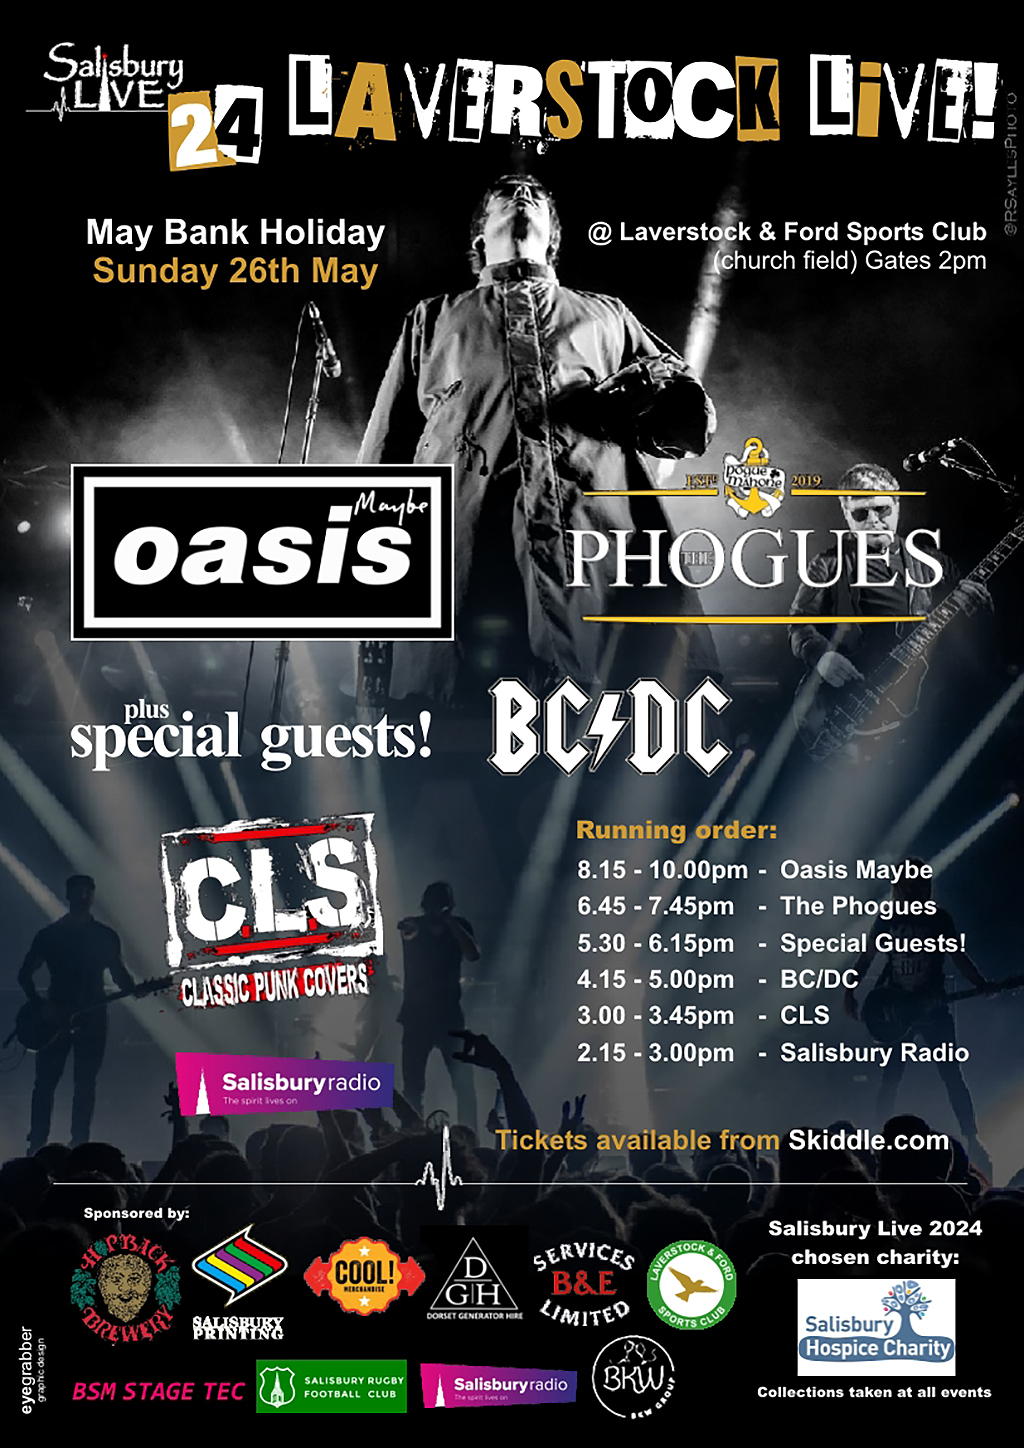 Salisbury Live 2024 - Laverstock Live! - Oasis Maybe + The Phogues + BC/DC + CLS